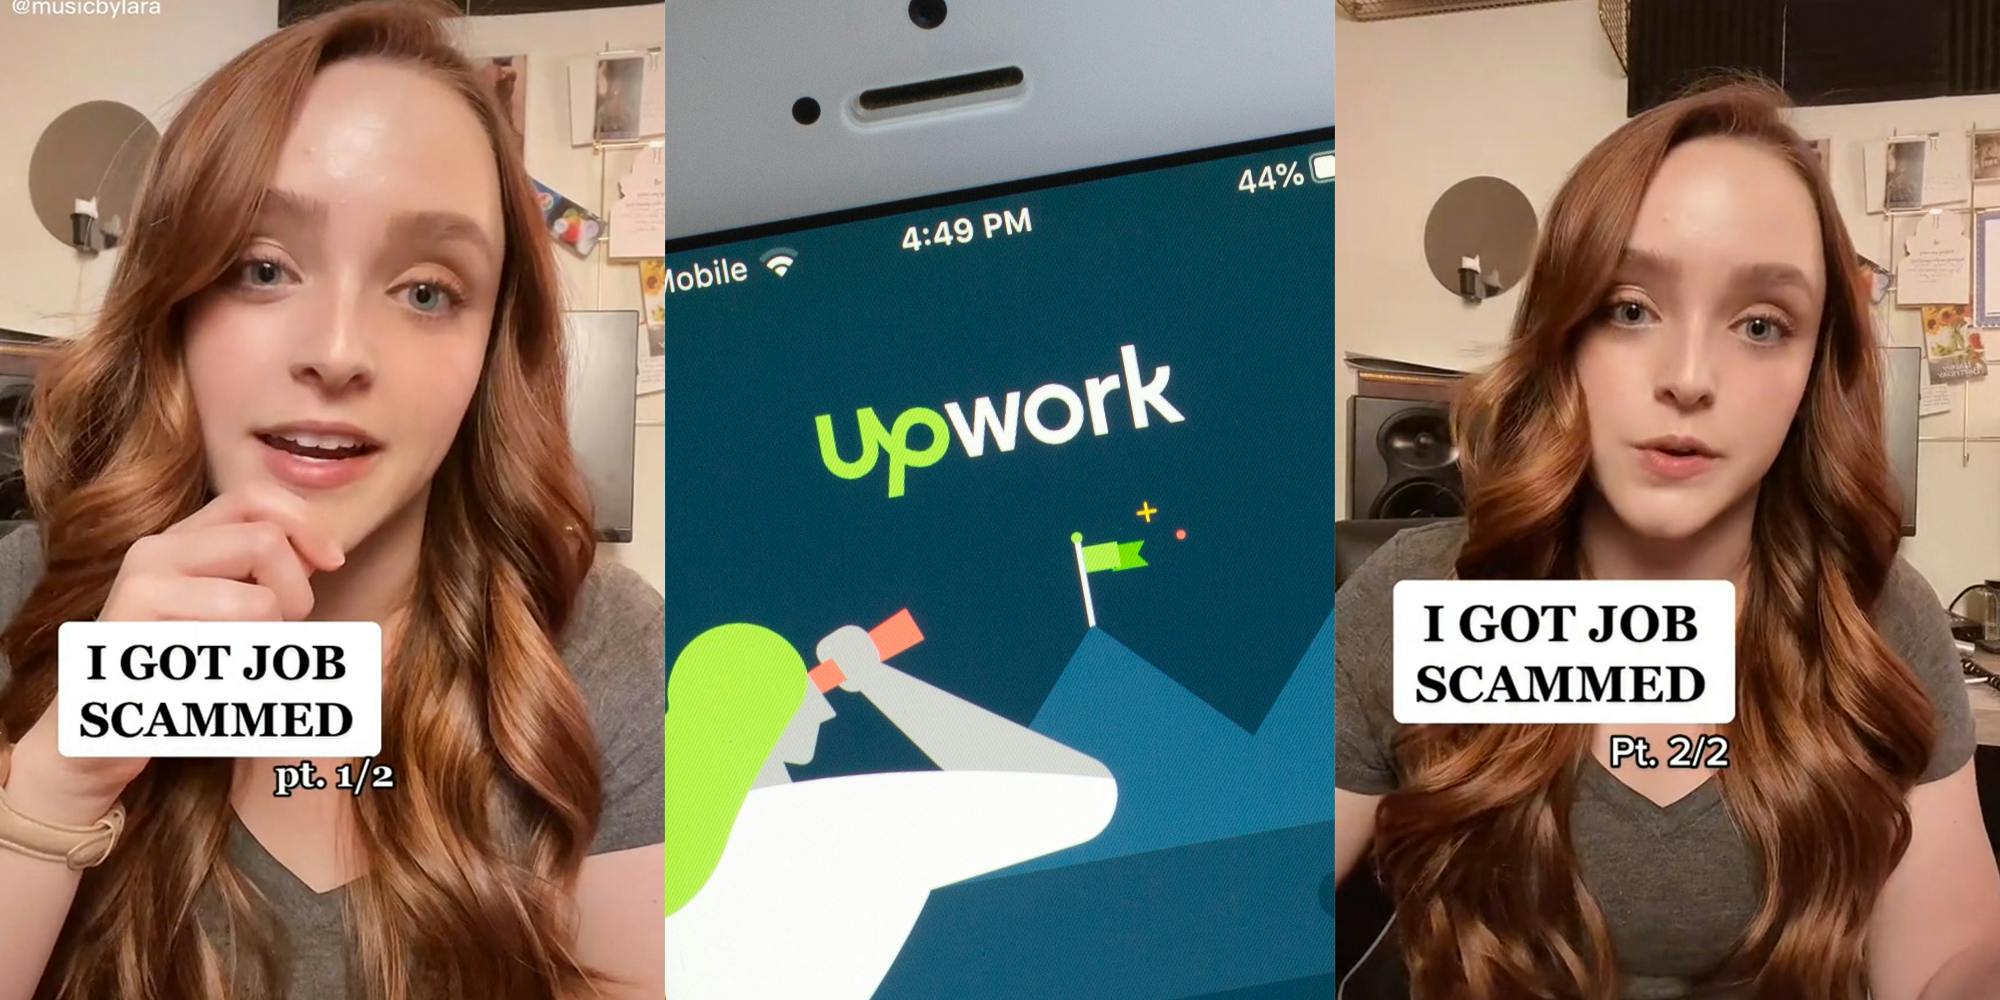 Woman Says She Got ‘Job Scammed’ After Applying for Job on Upwork